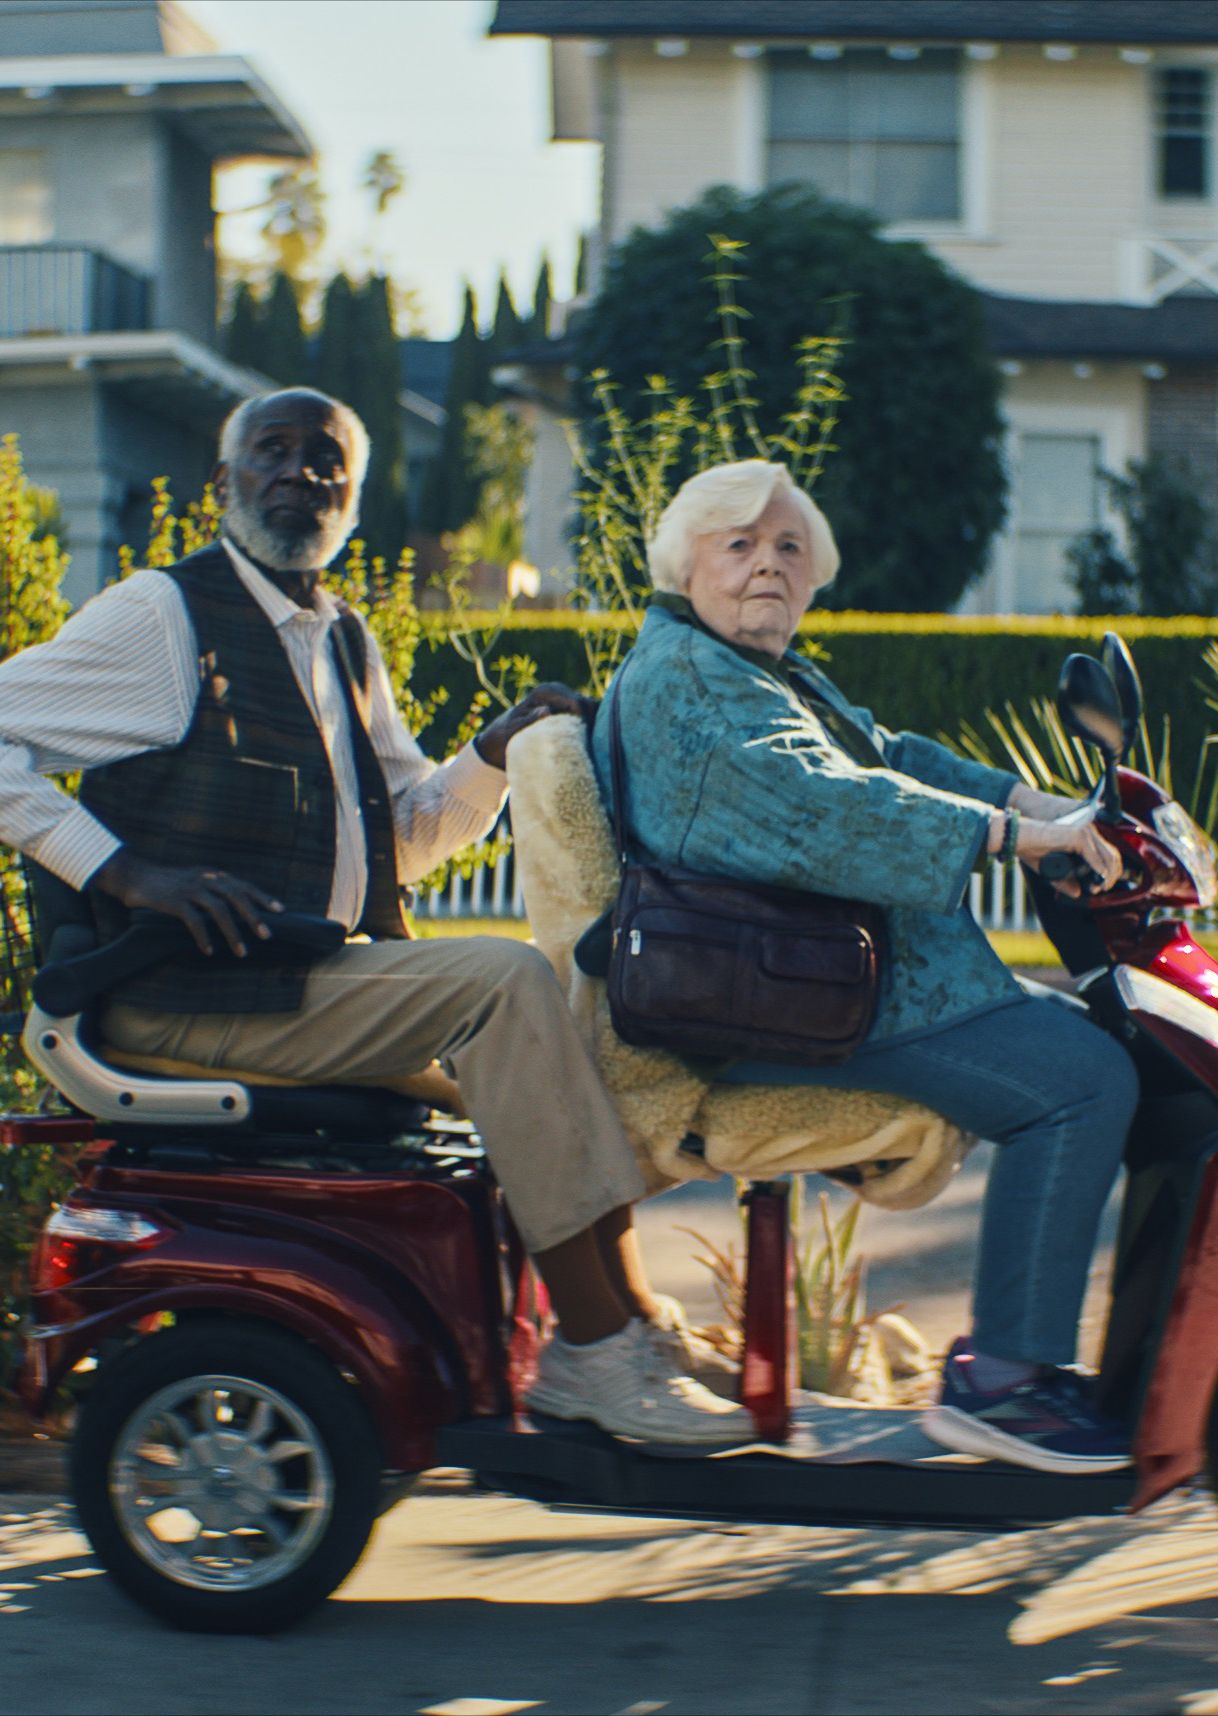 Thelma Review June Squibb Could Be the Next Tom Cruise